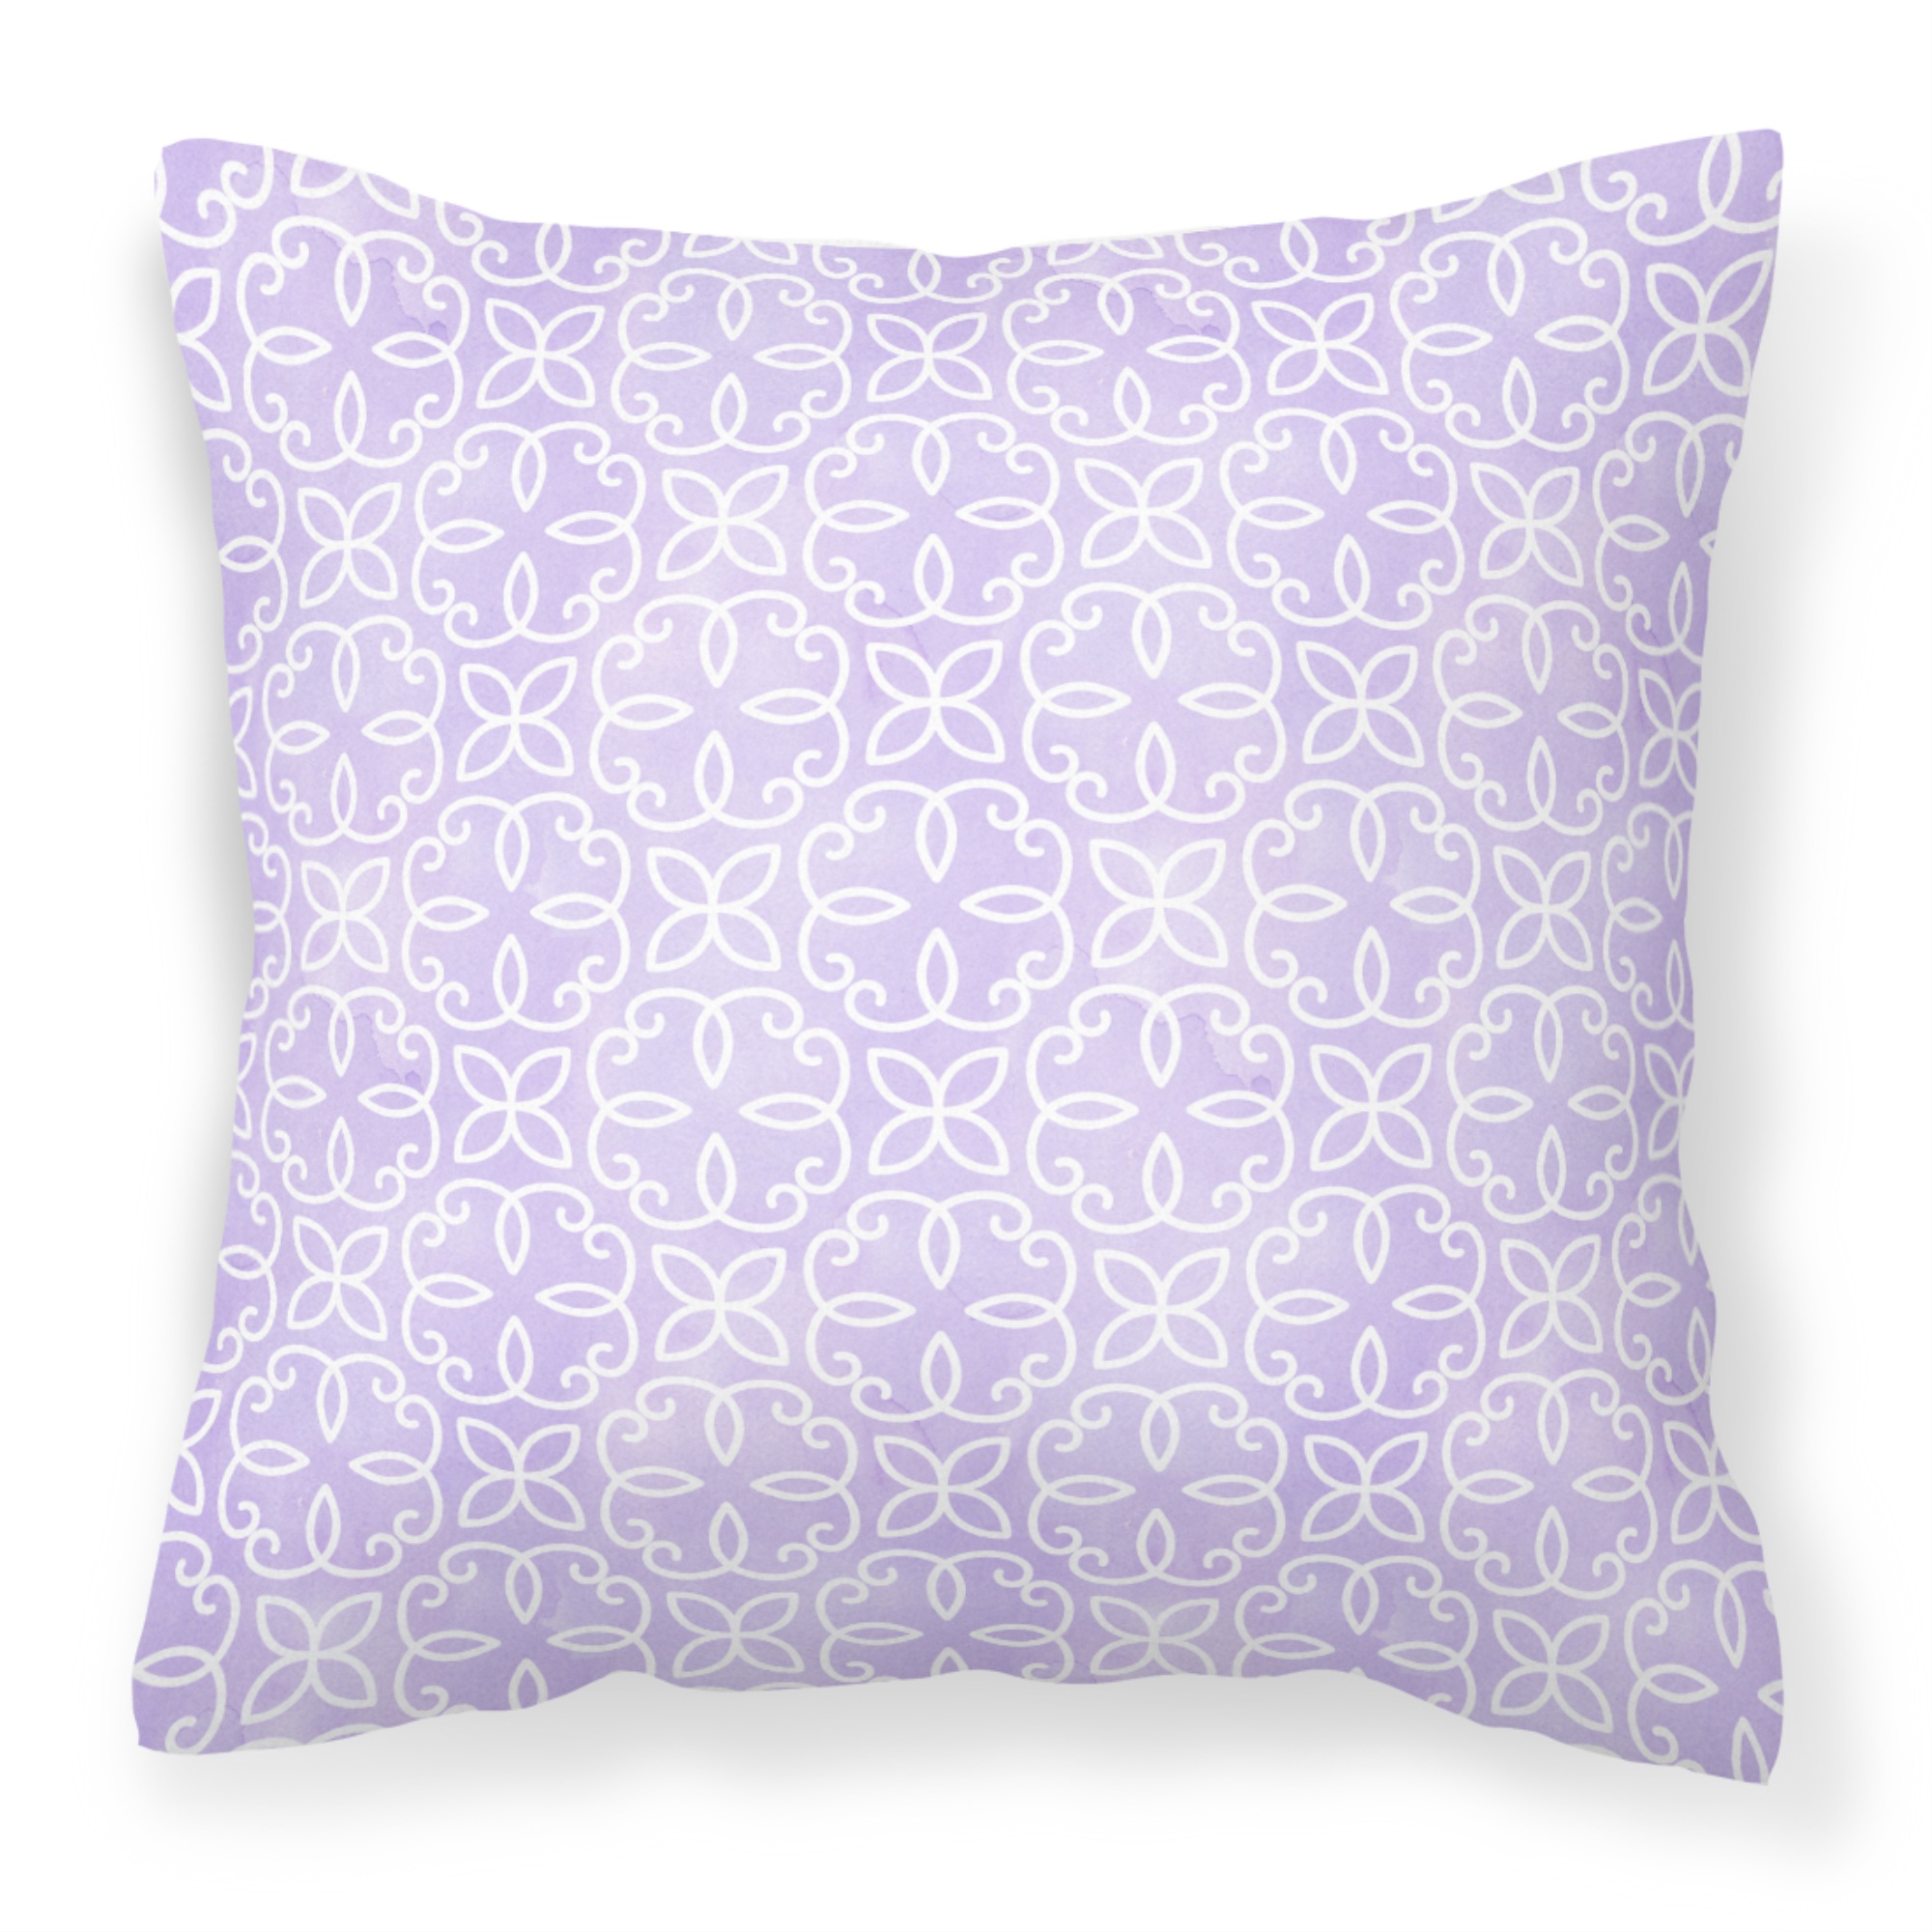 Caroline's Treasures "Caroline's Treasures BB7494PW1818 Gemoetric Circles on Purple Watercolor Outdoor Canvas Pillow, Multicolor"